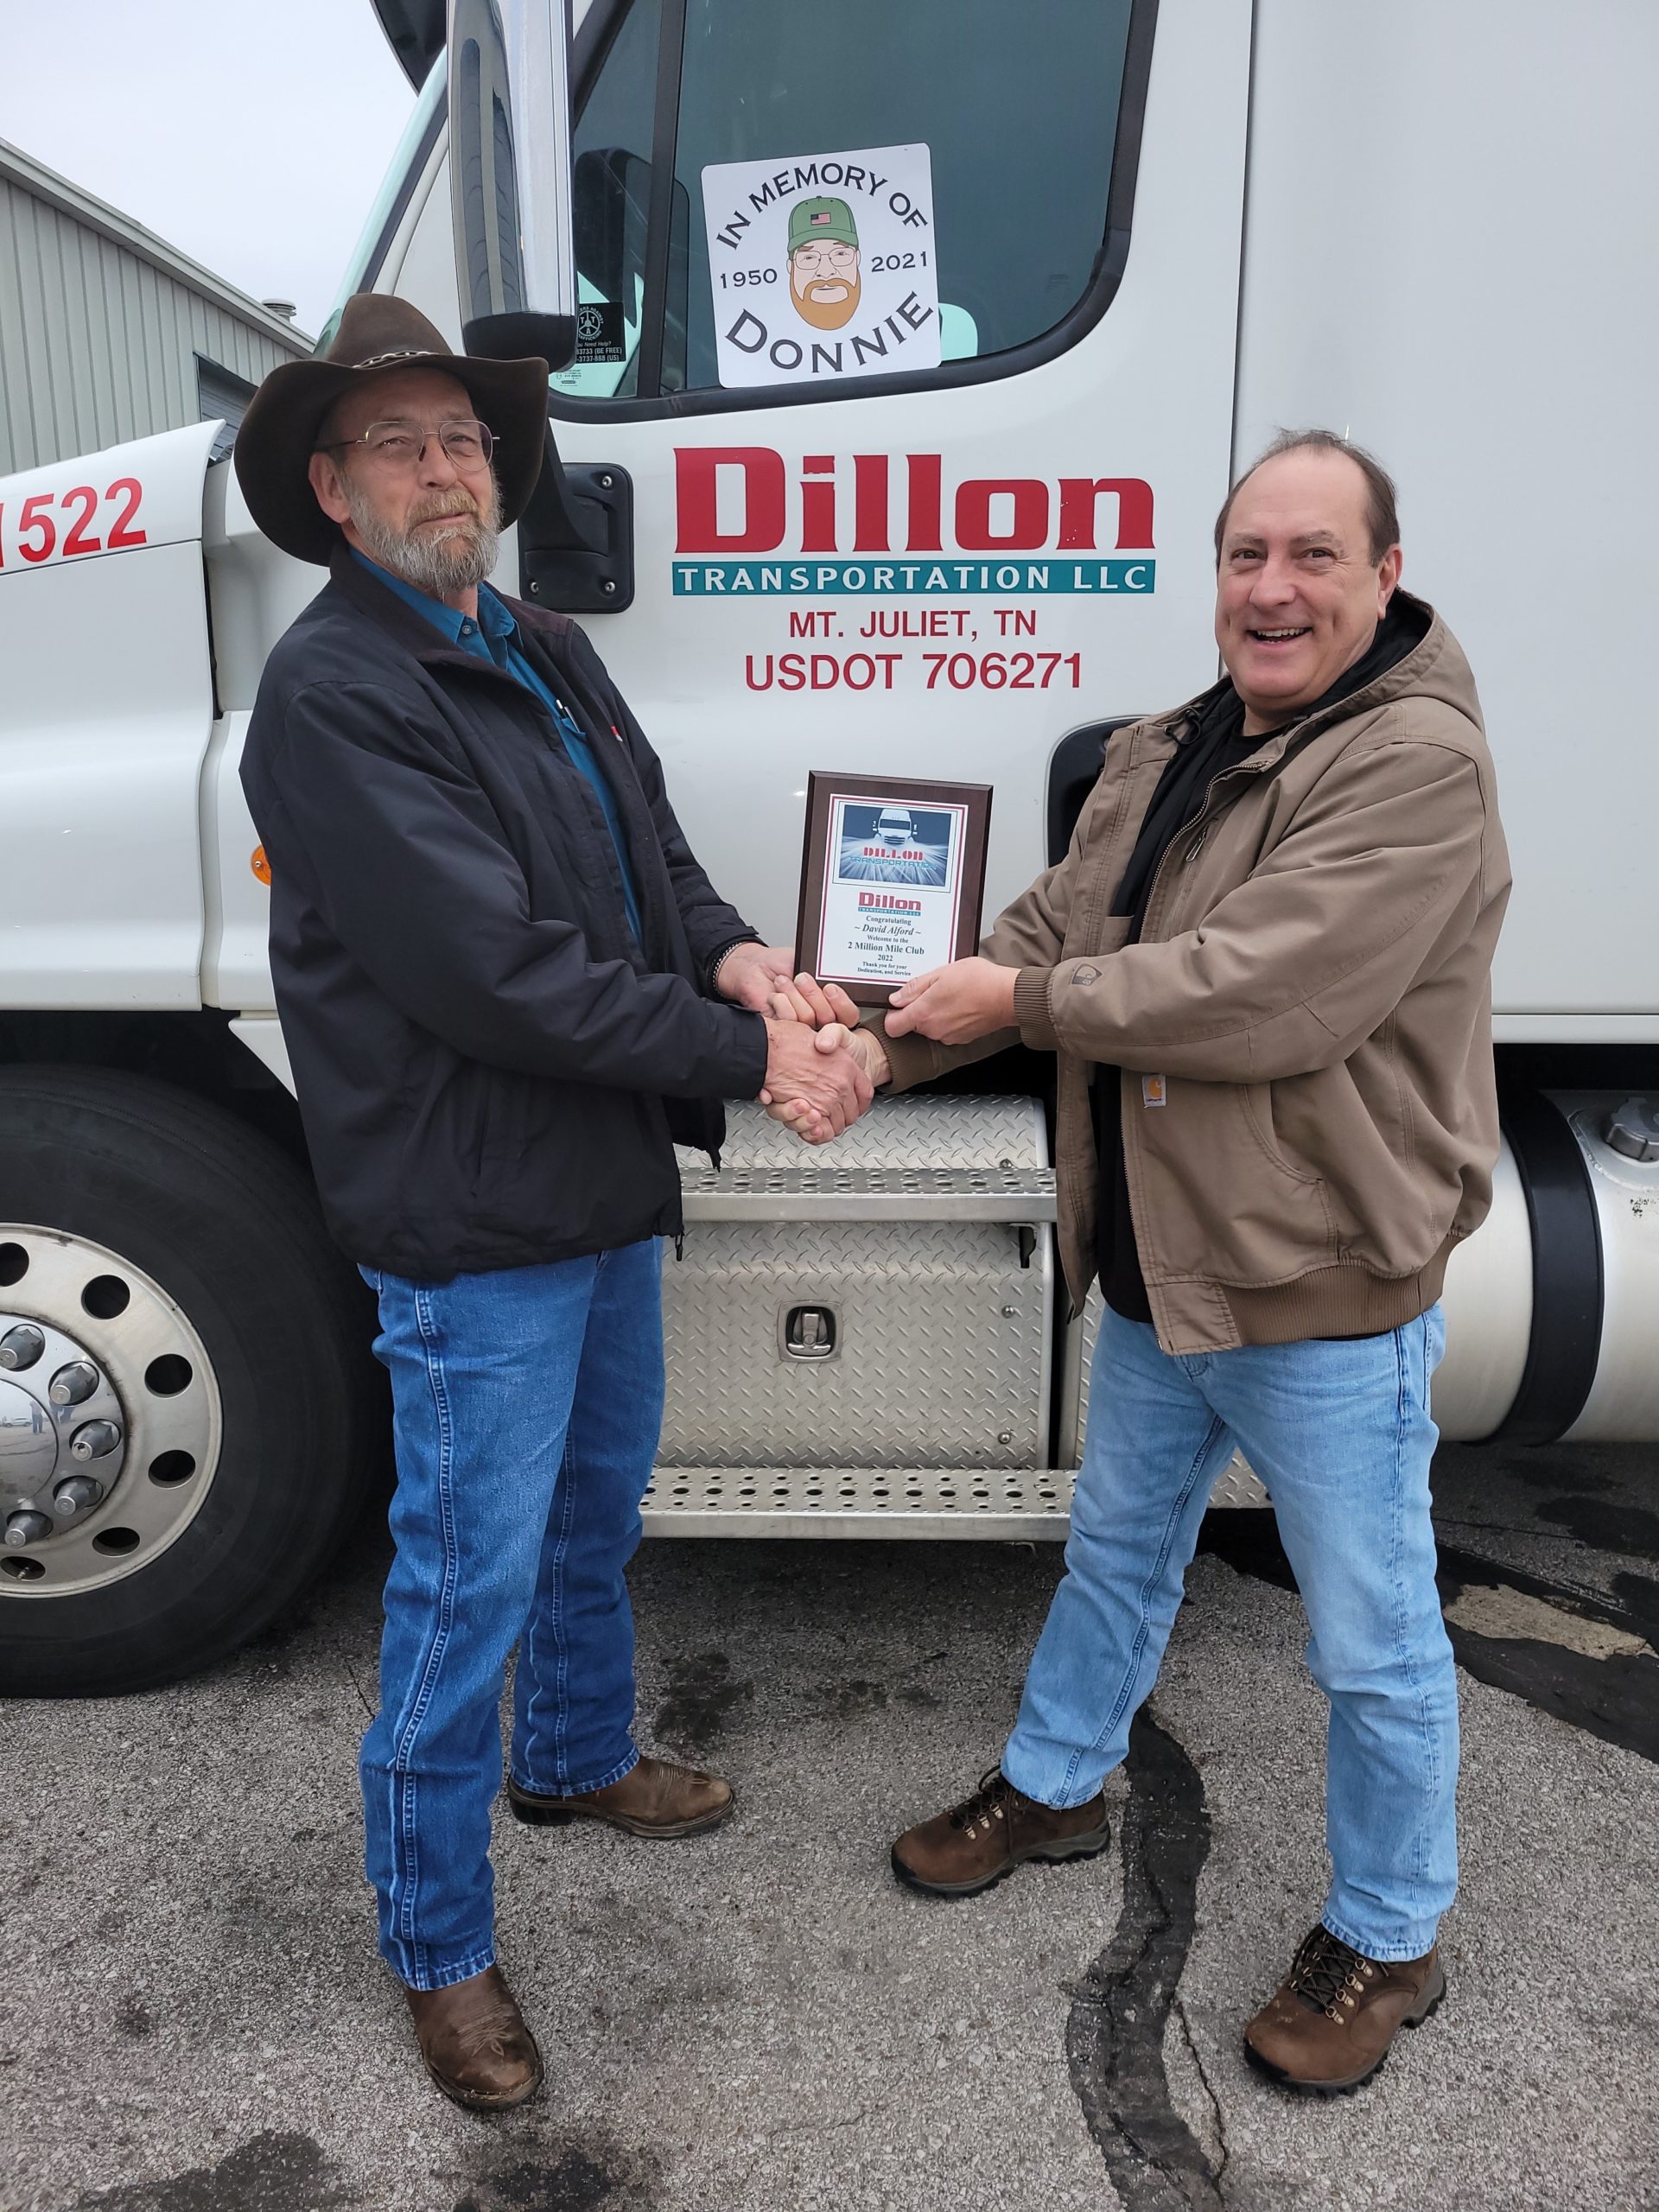 David Alford receiving his plaque for the Million Mile Club honoring his 2 Million Miles of Service!